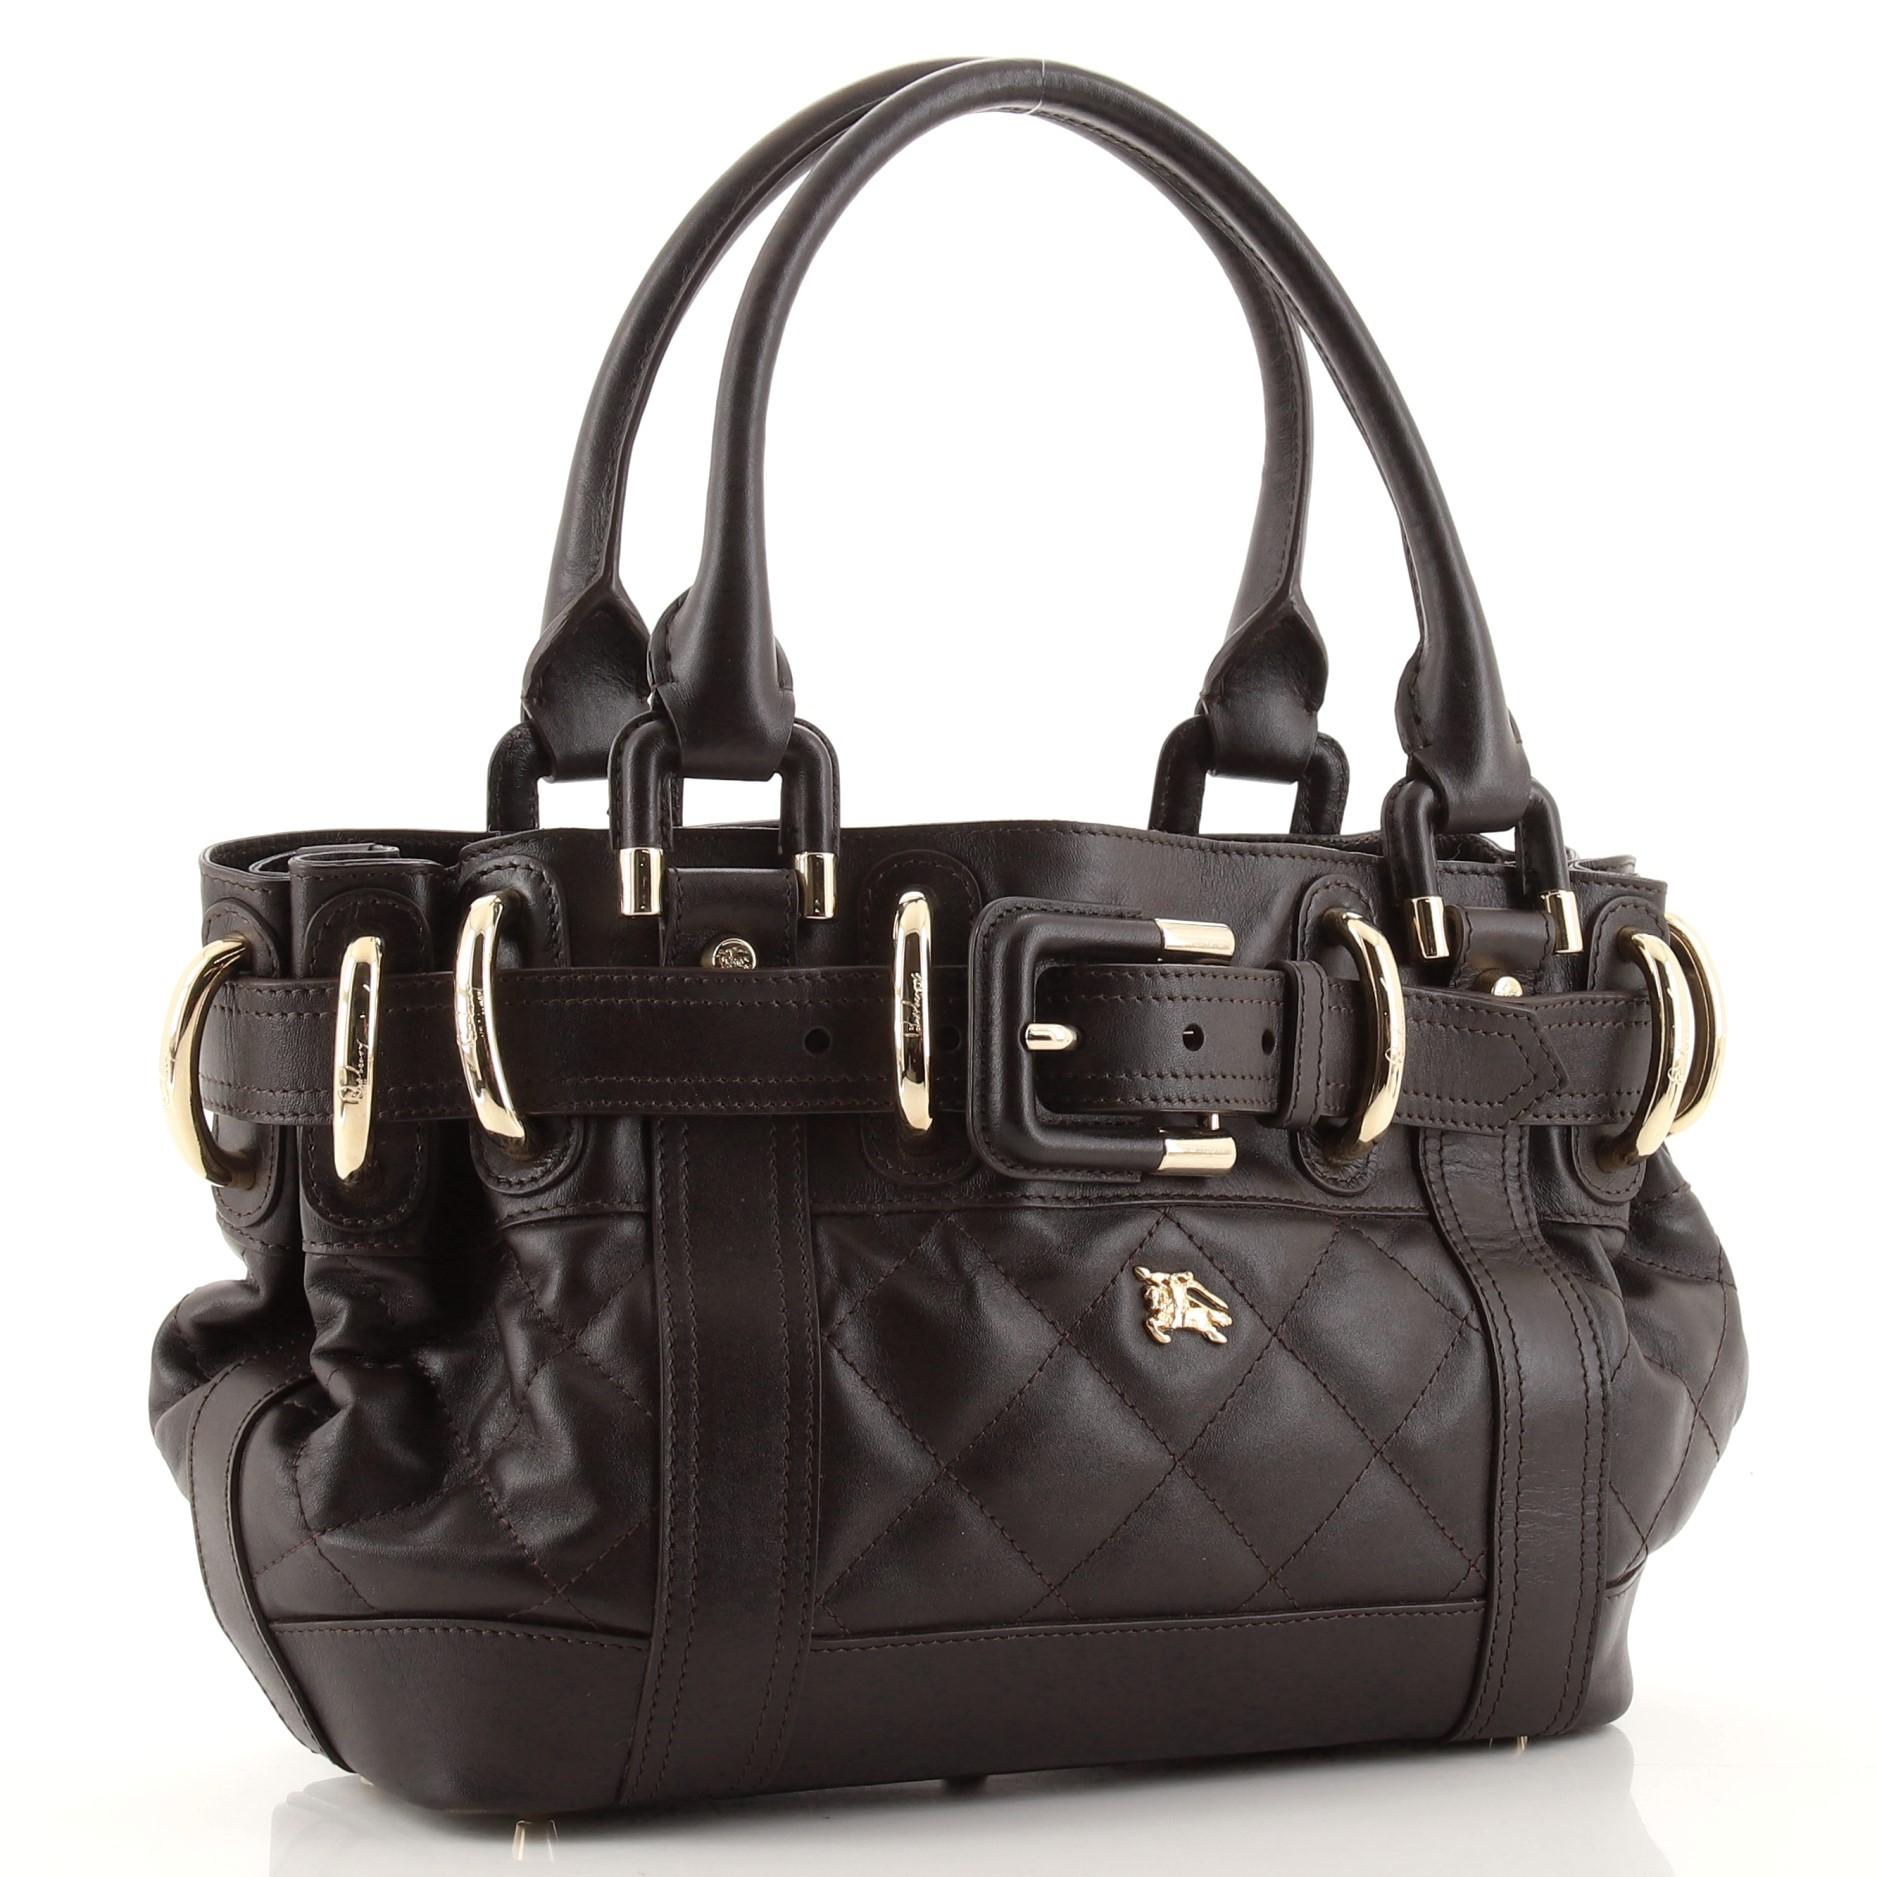 Black Burberry Beaton Bag Quilted Leather Baby